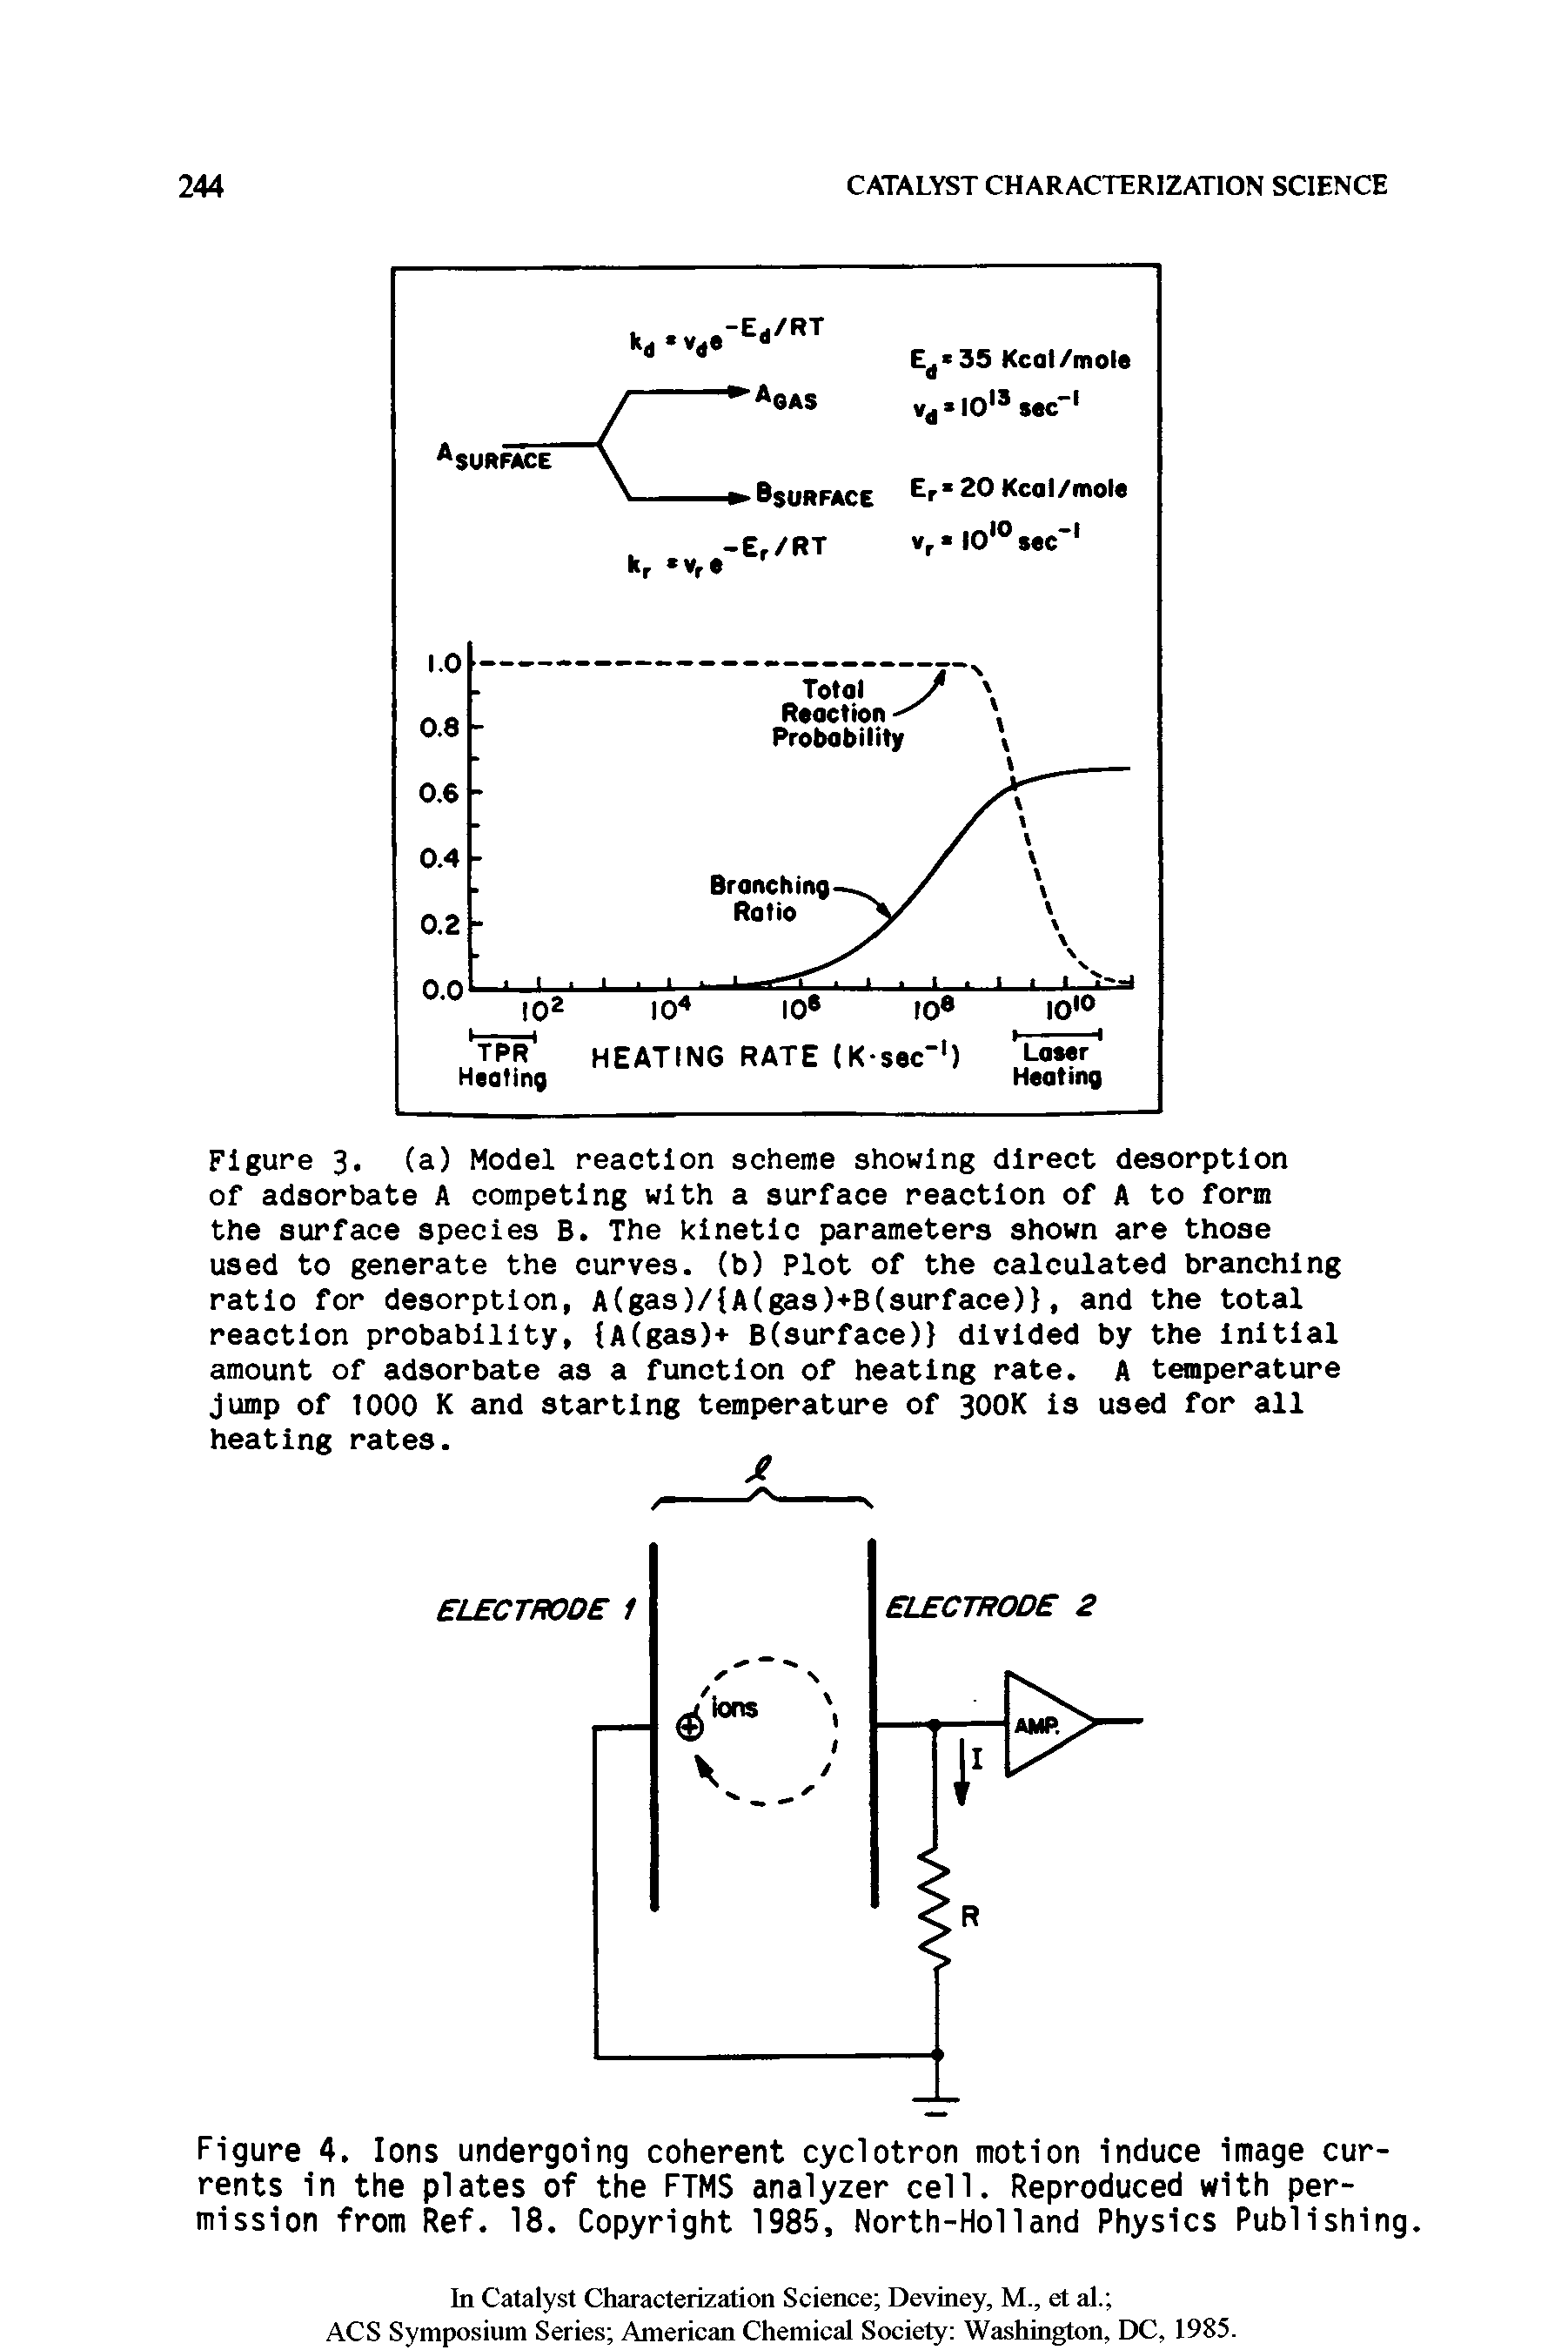 Figure 4. Ions undergoing coherent cyclotron motion induce image currents in the plates of the FTMS analyzer cell. Reproduced with permission from Ref. 18. Copyright 1985, North-Holland Physics Publishing.